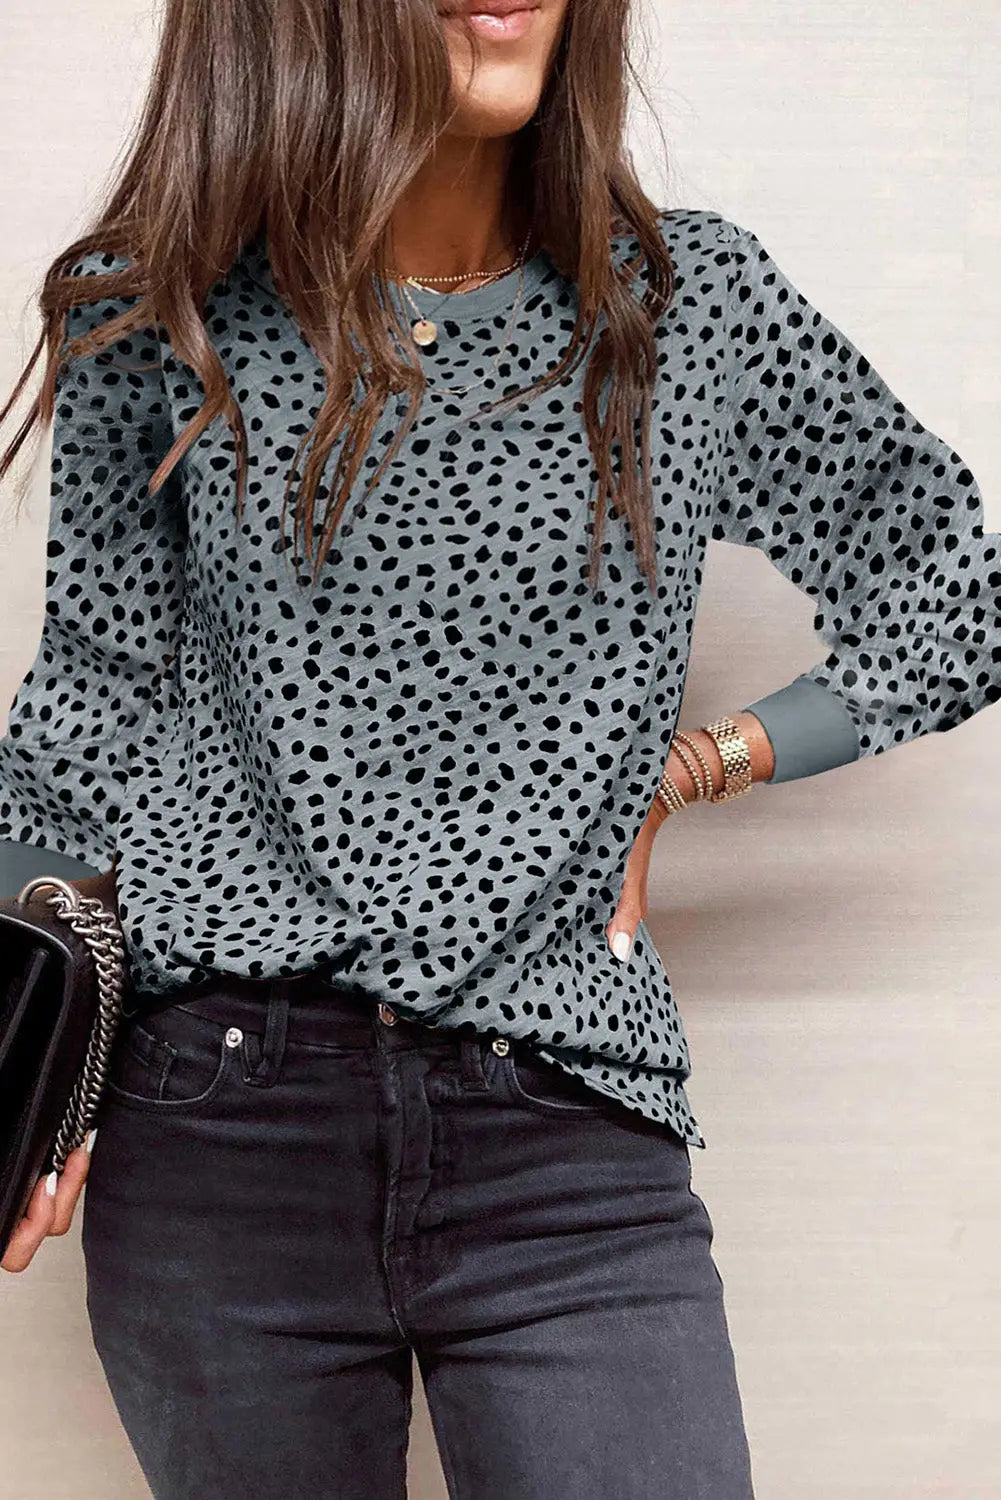 Animal spotted print round neck long sleeve top - gray1 / s